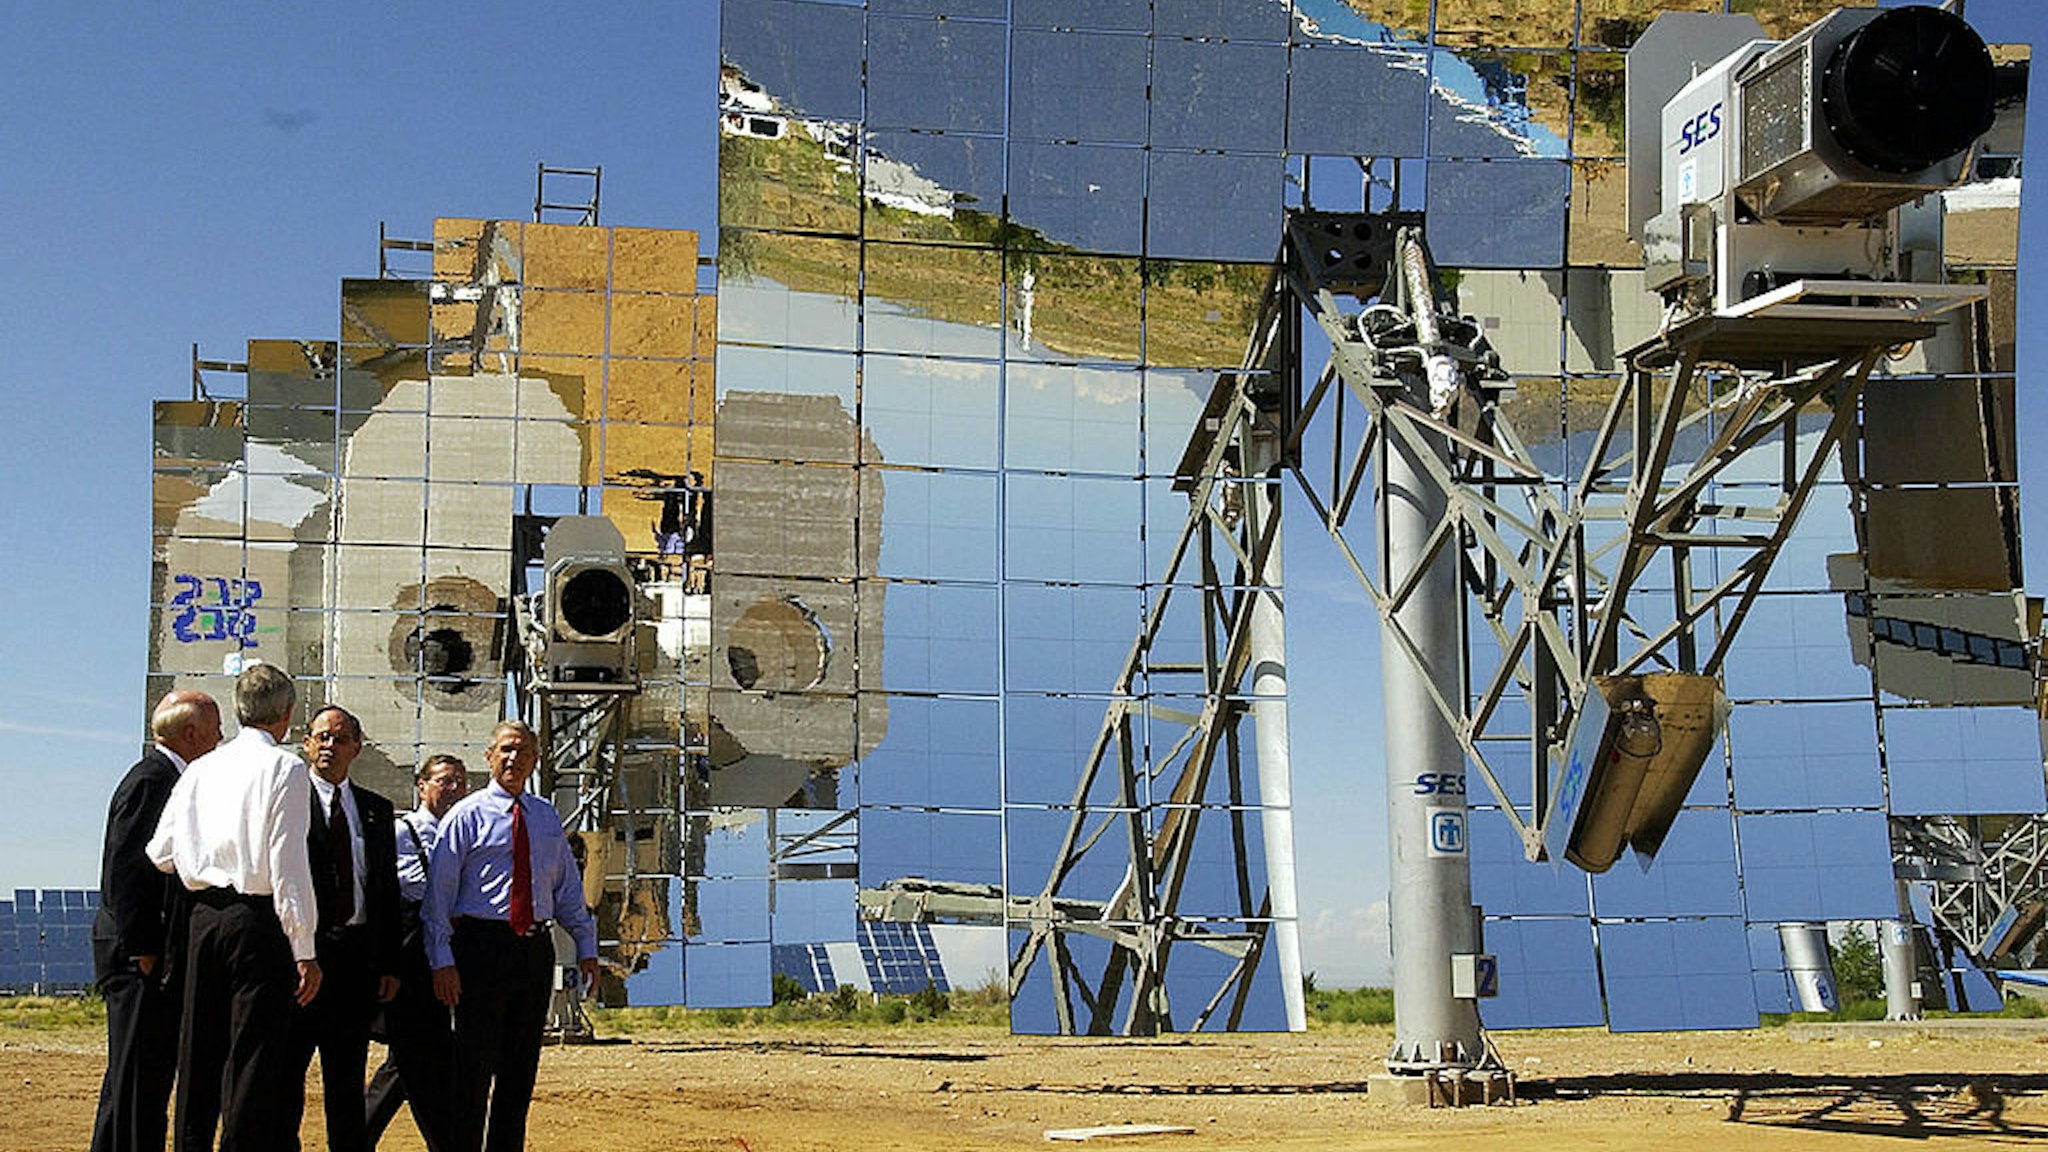 US President George W. Bush (R) walk past a parabolic dish during a tour of the Department of Energy's National Solar Thermal Test Facility at Sandia National Laboratories